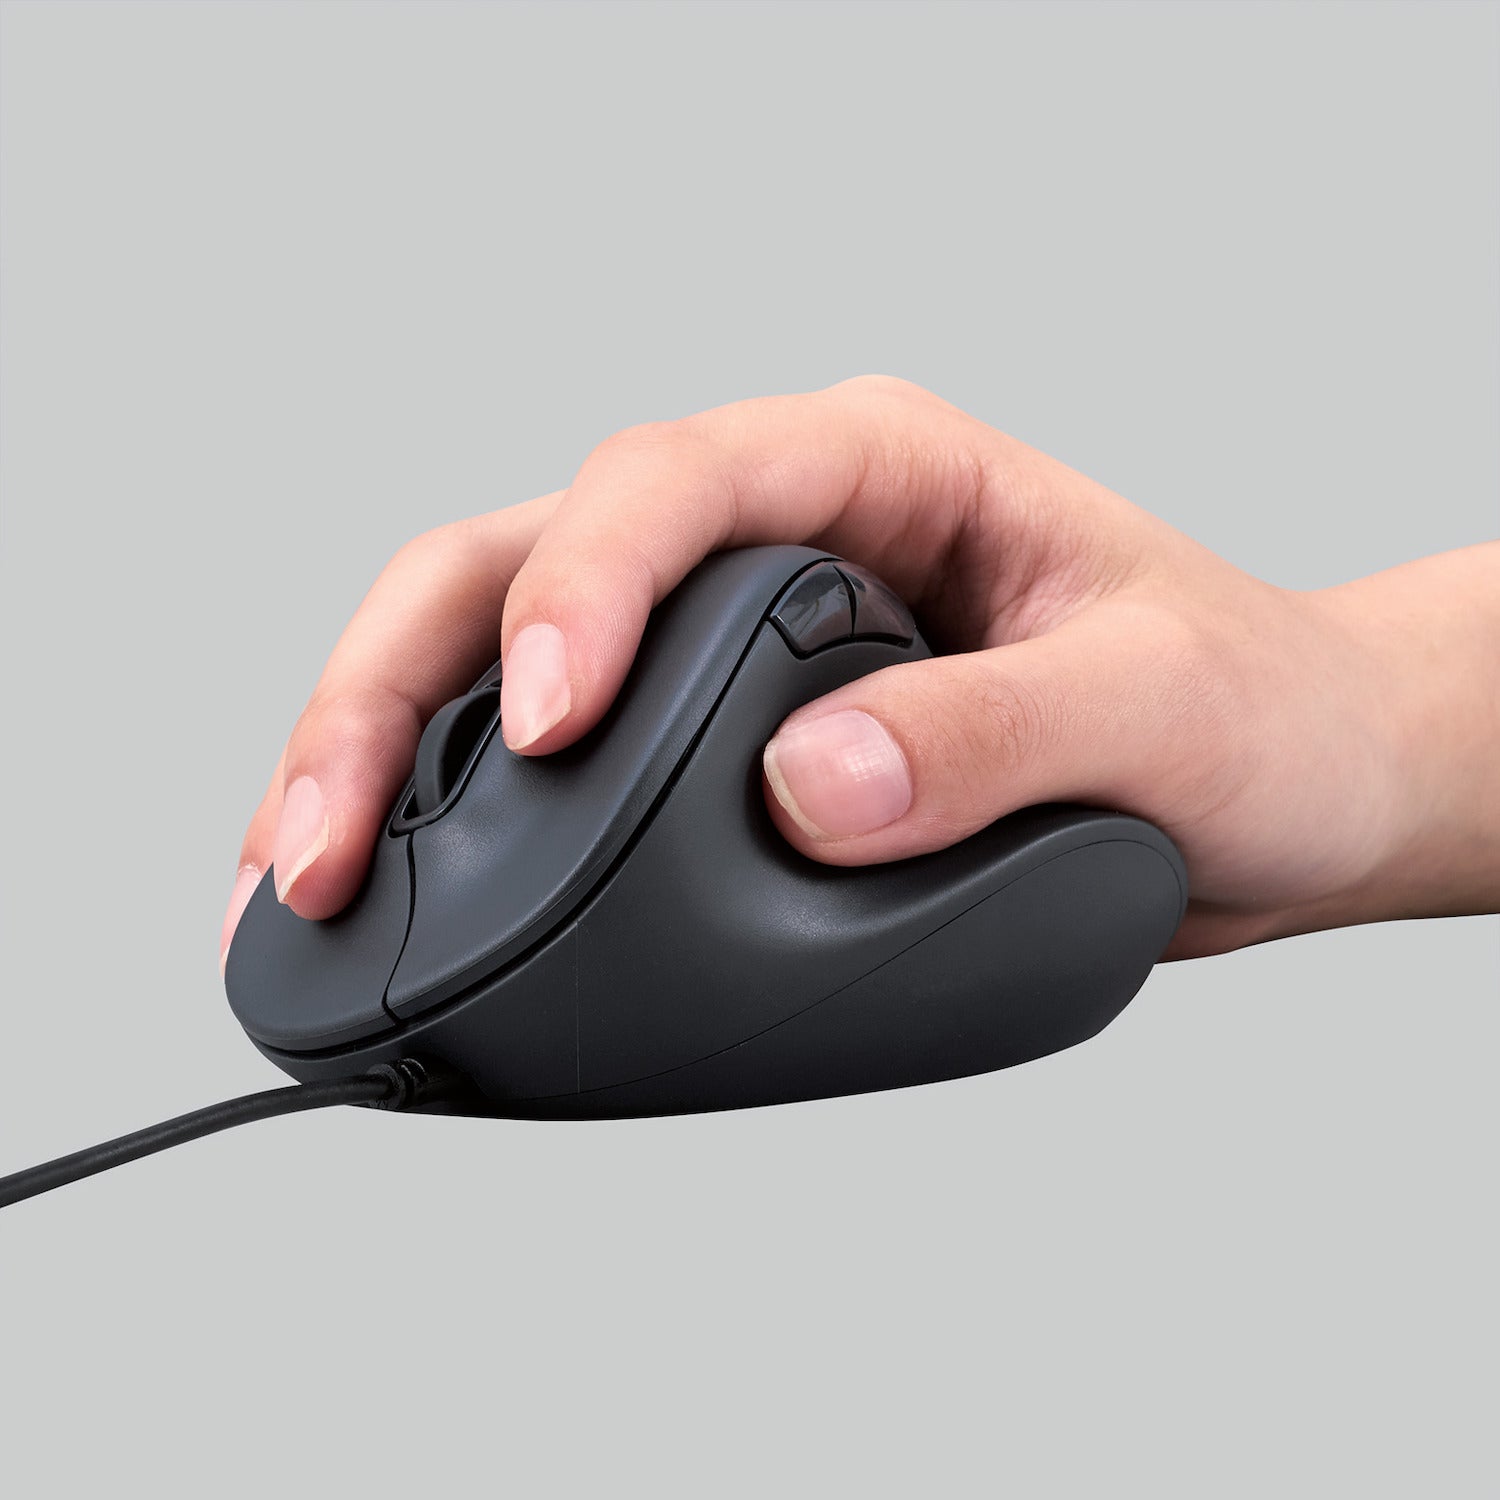 EX-G Wired Ergonomic Mouse